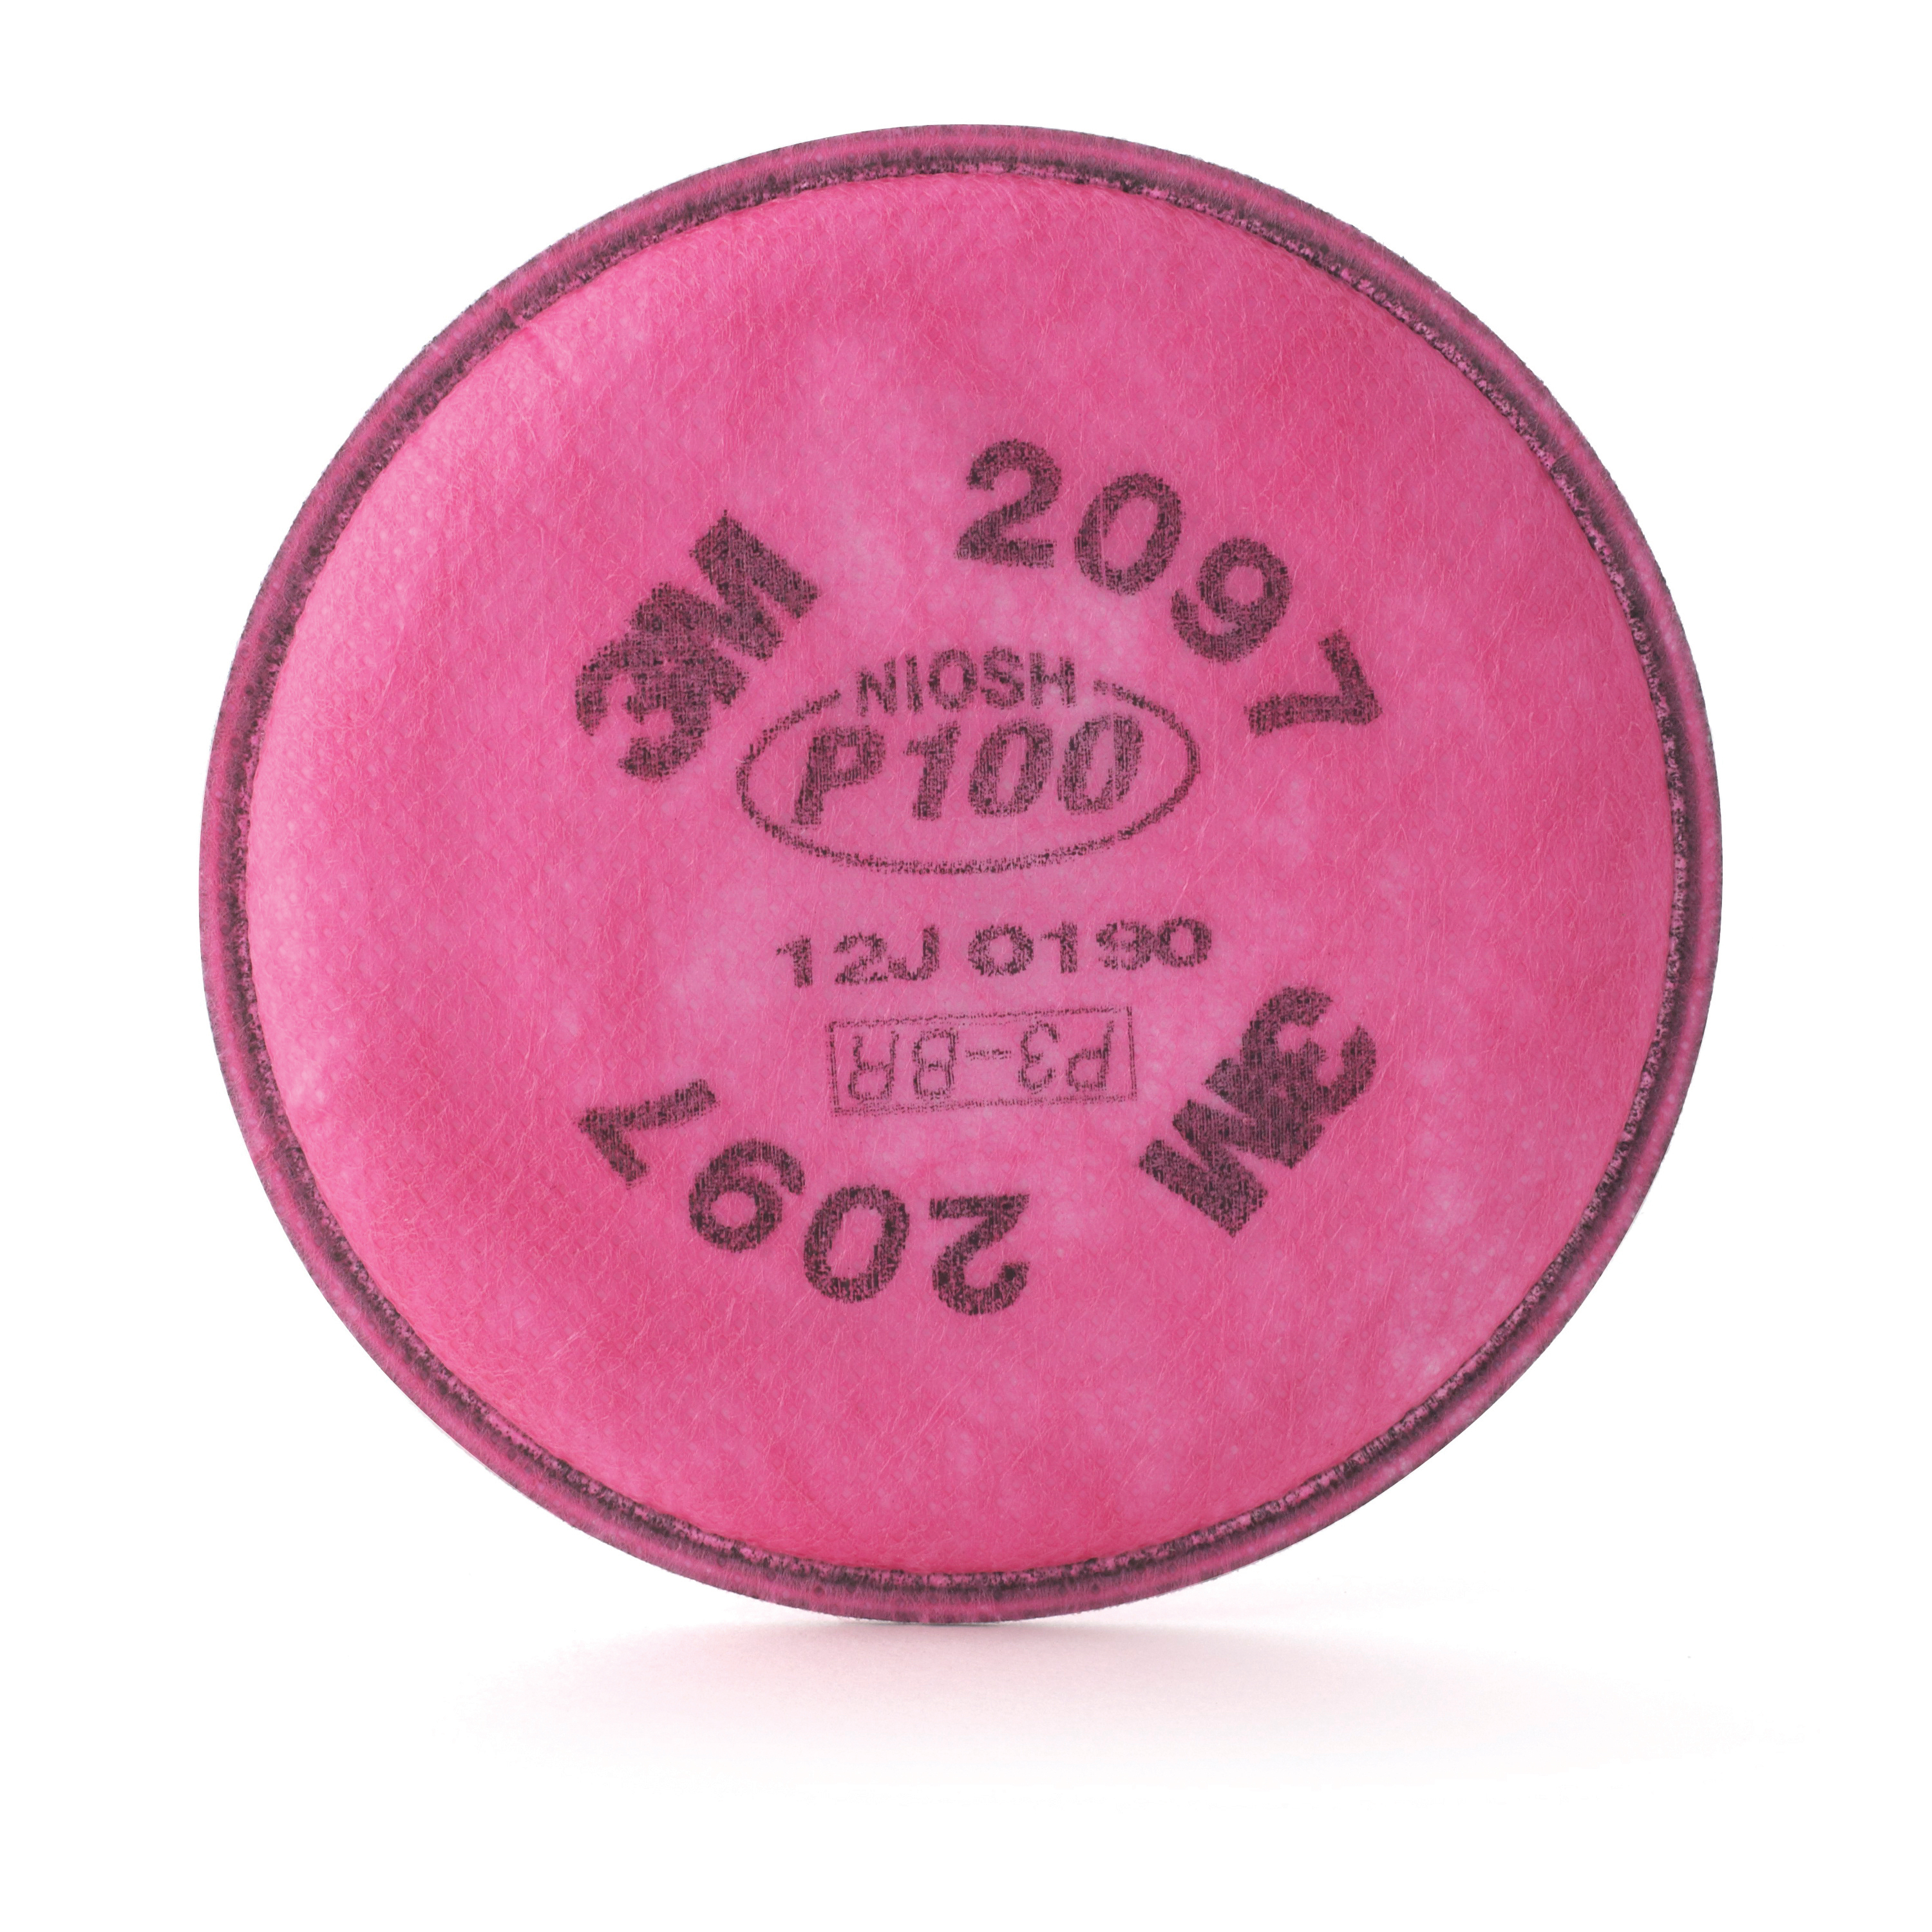 3M™ 051131-07184 2097 Particulate Filter With Nuisance Level Organic Vapor Relief, For Use With 3M™ 5000 Series Reusable Respirators, 6000 Series Cartridges with 502 Adapters, 6000, 7000 and FF-400 Series Respirators, P100 Filter Class, Bayonet Connection